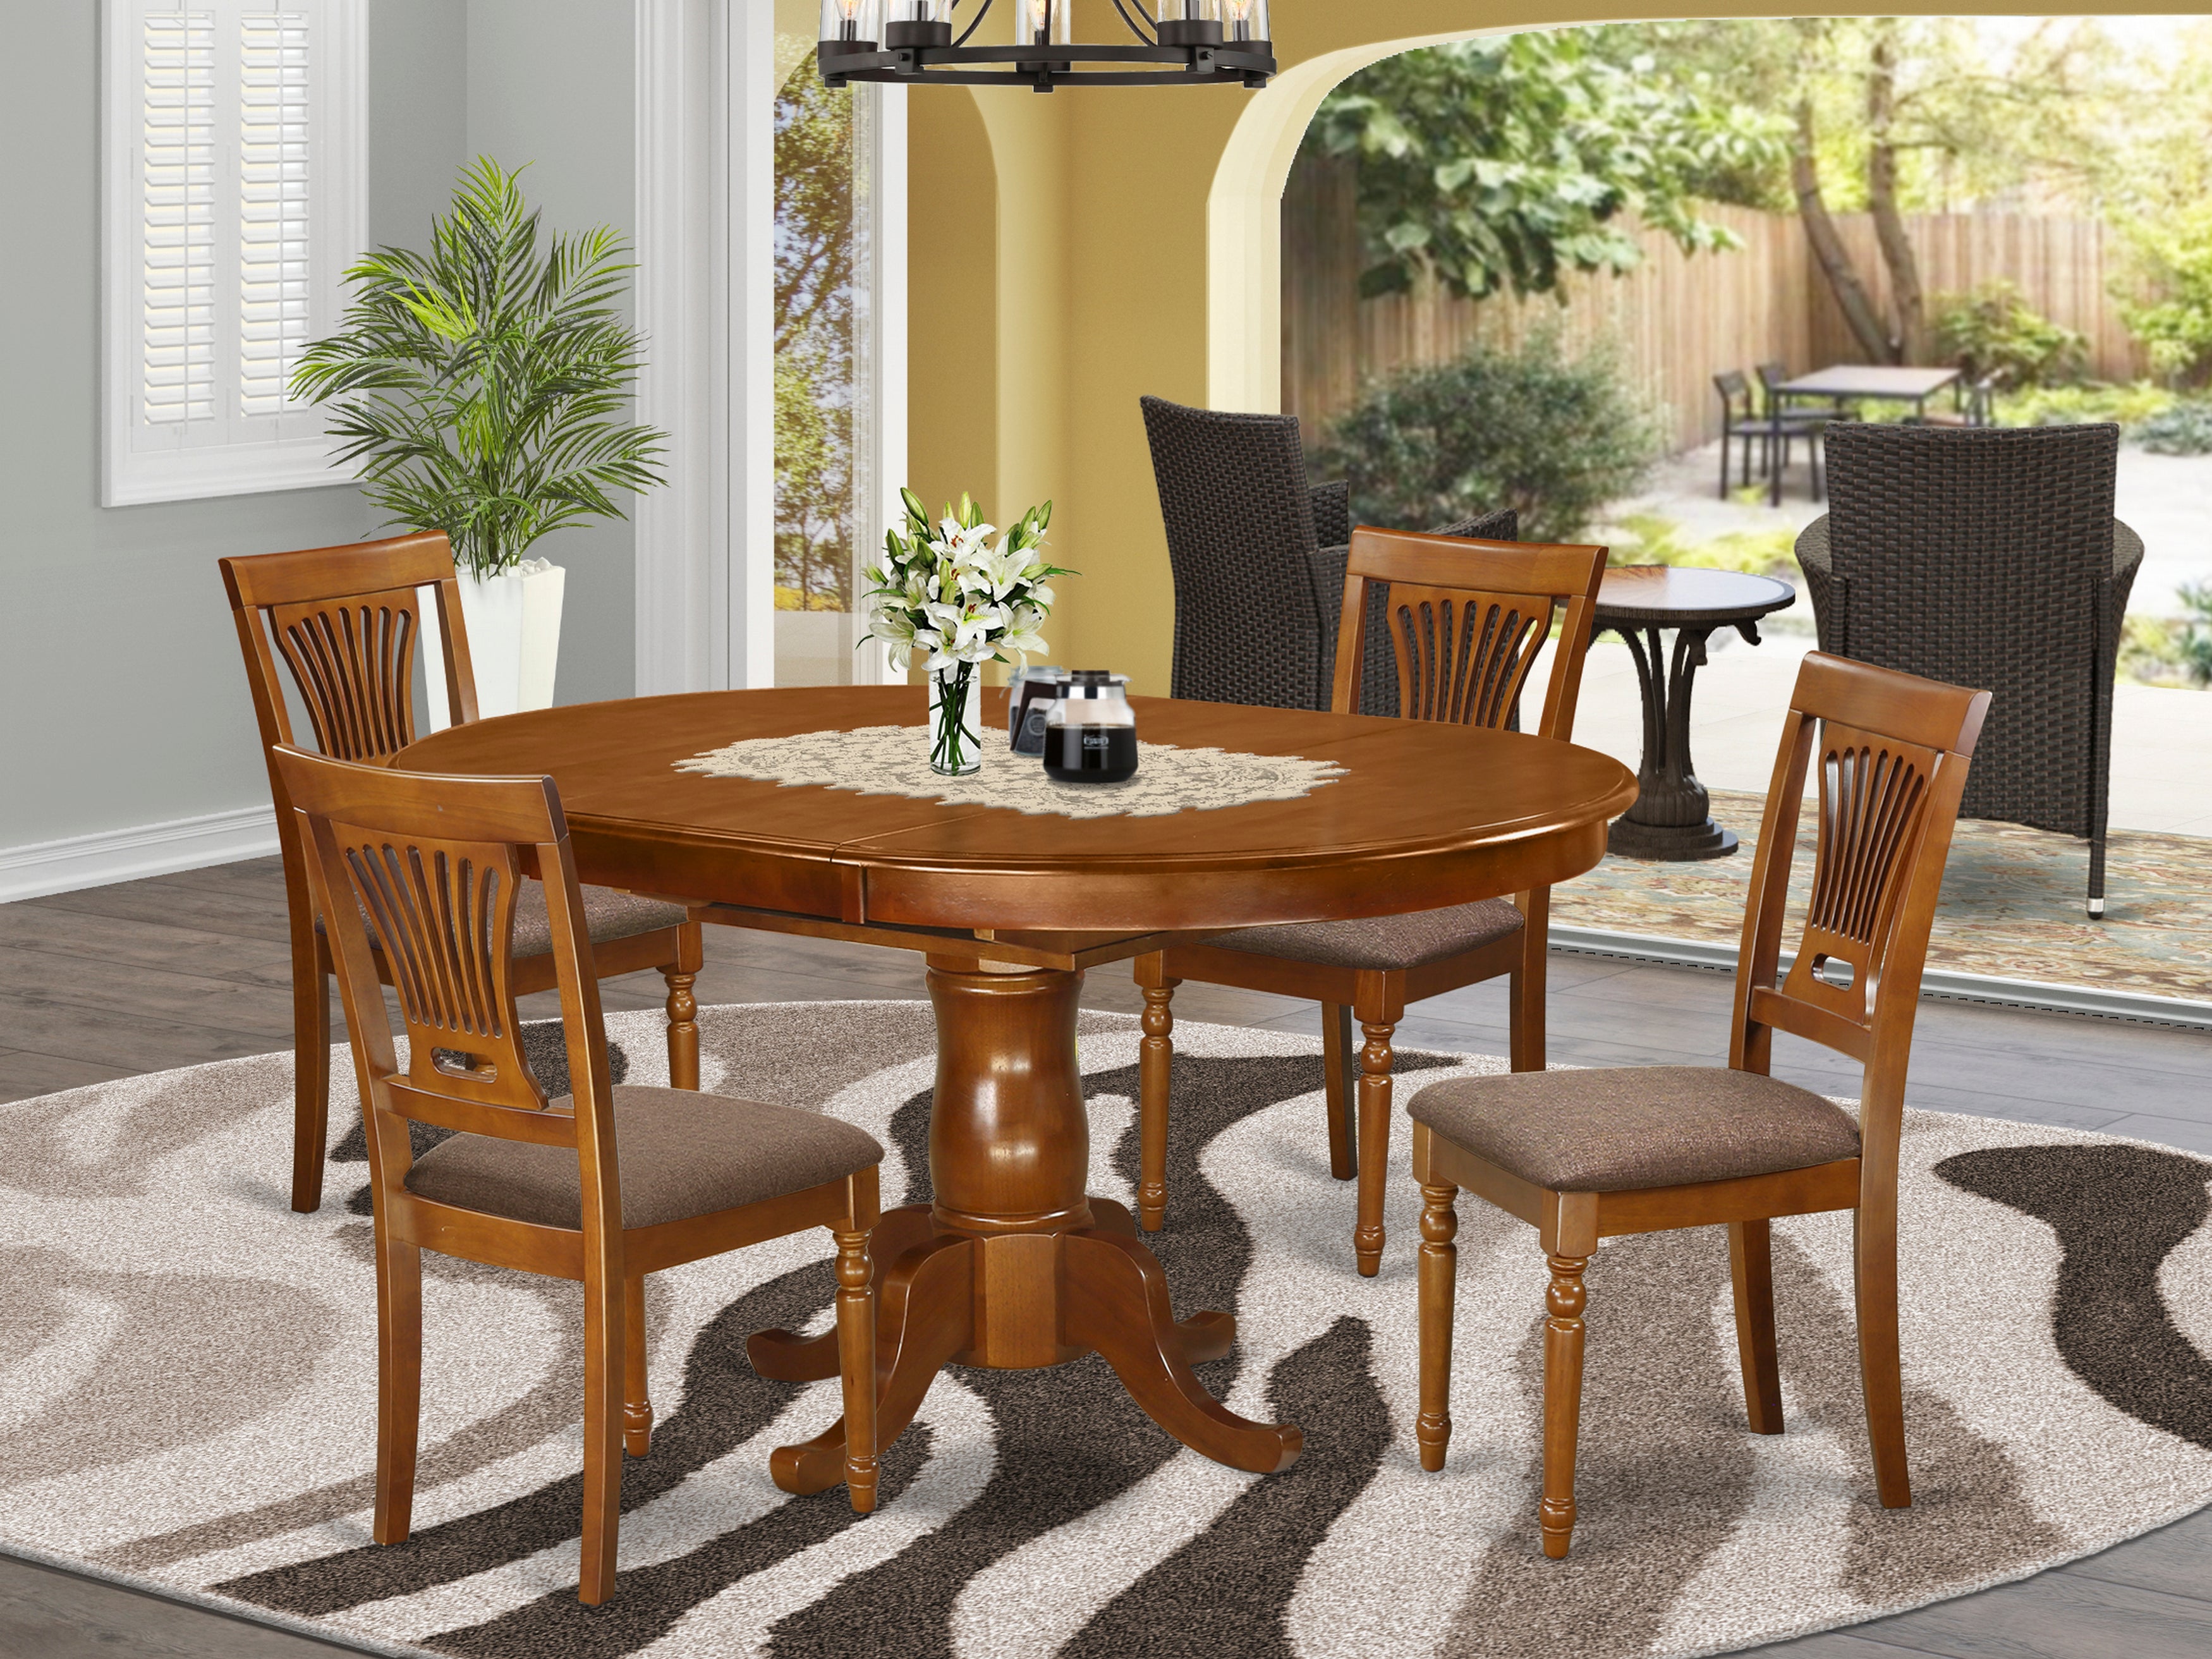 5 Pc Portland Dining Room Oval Table With Leaf and 4 Chairs in Saddle Brown